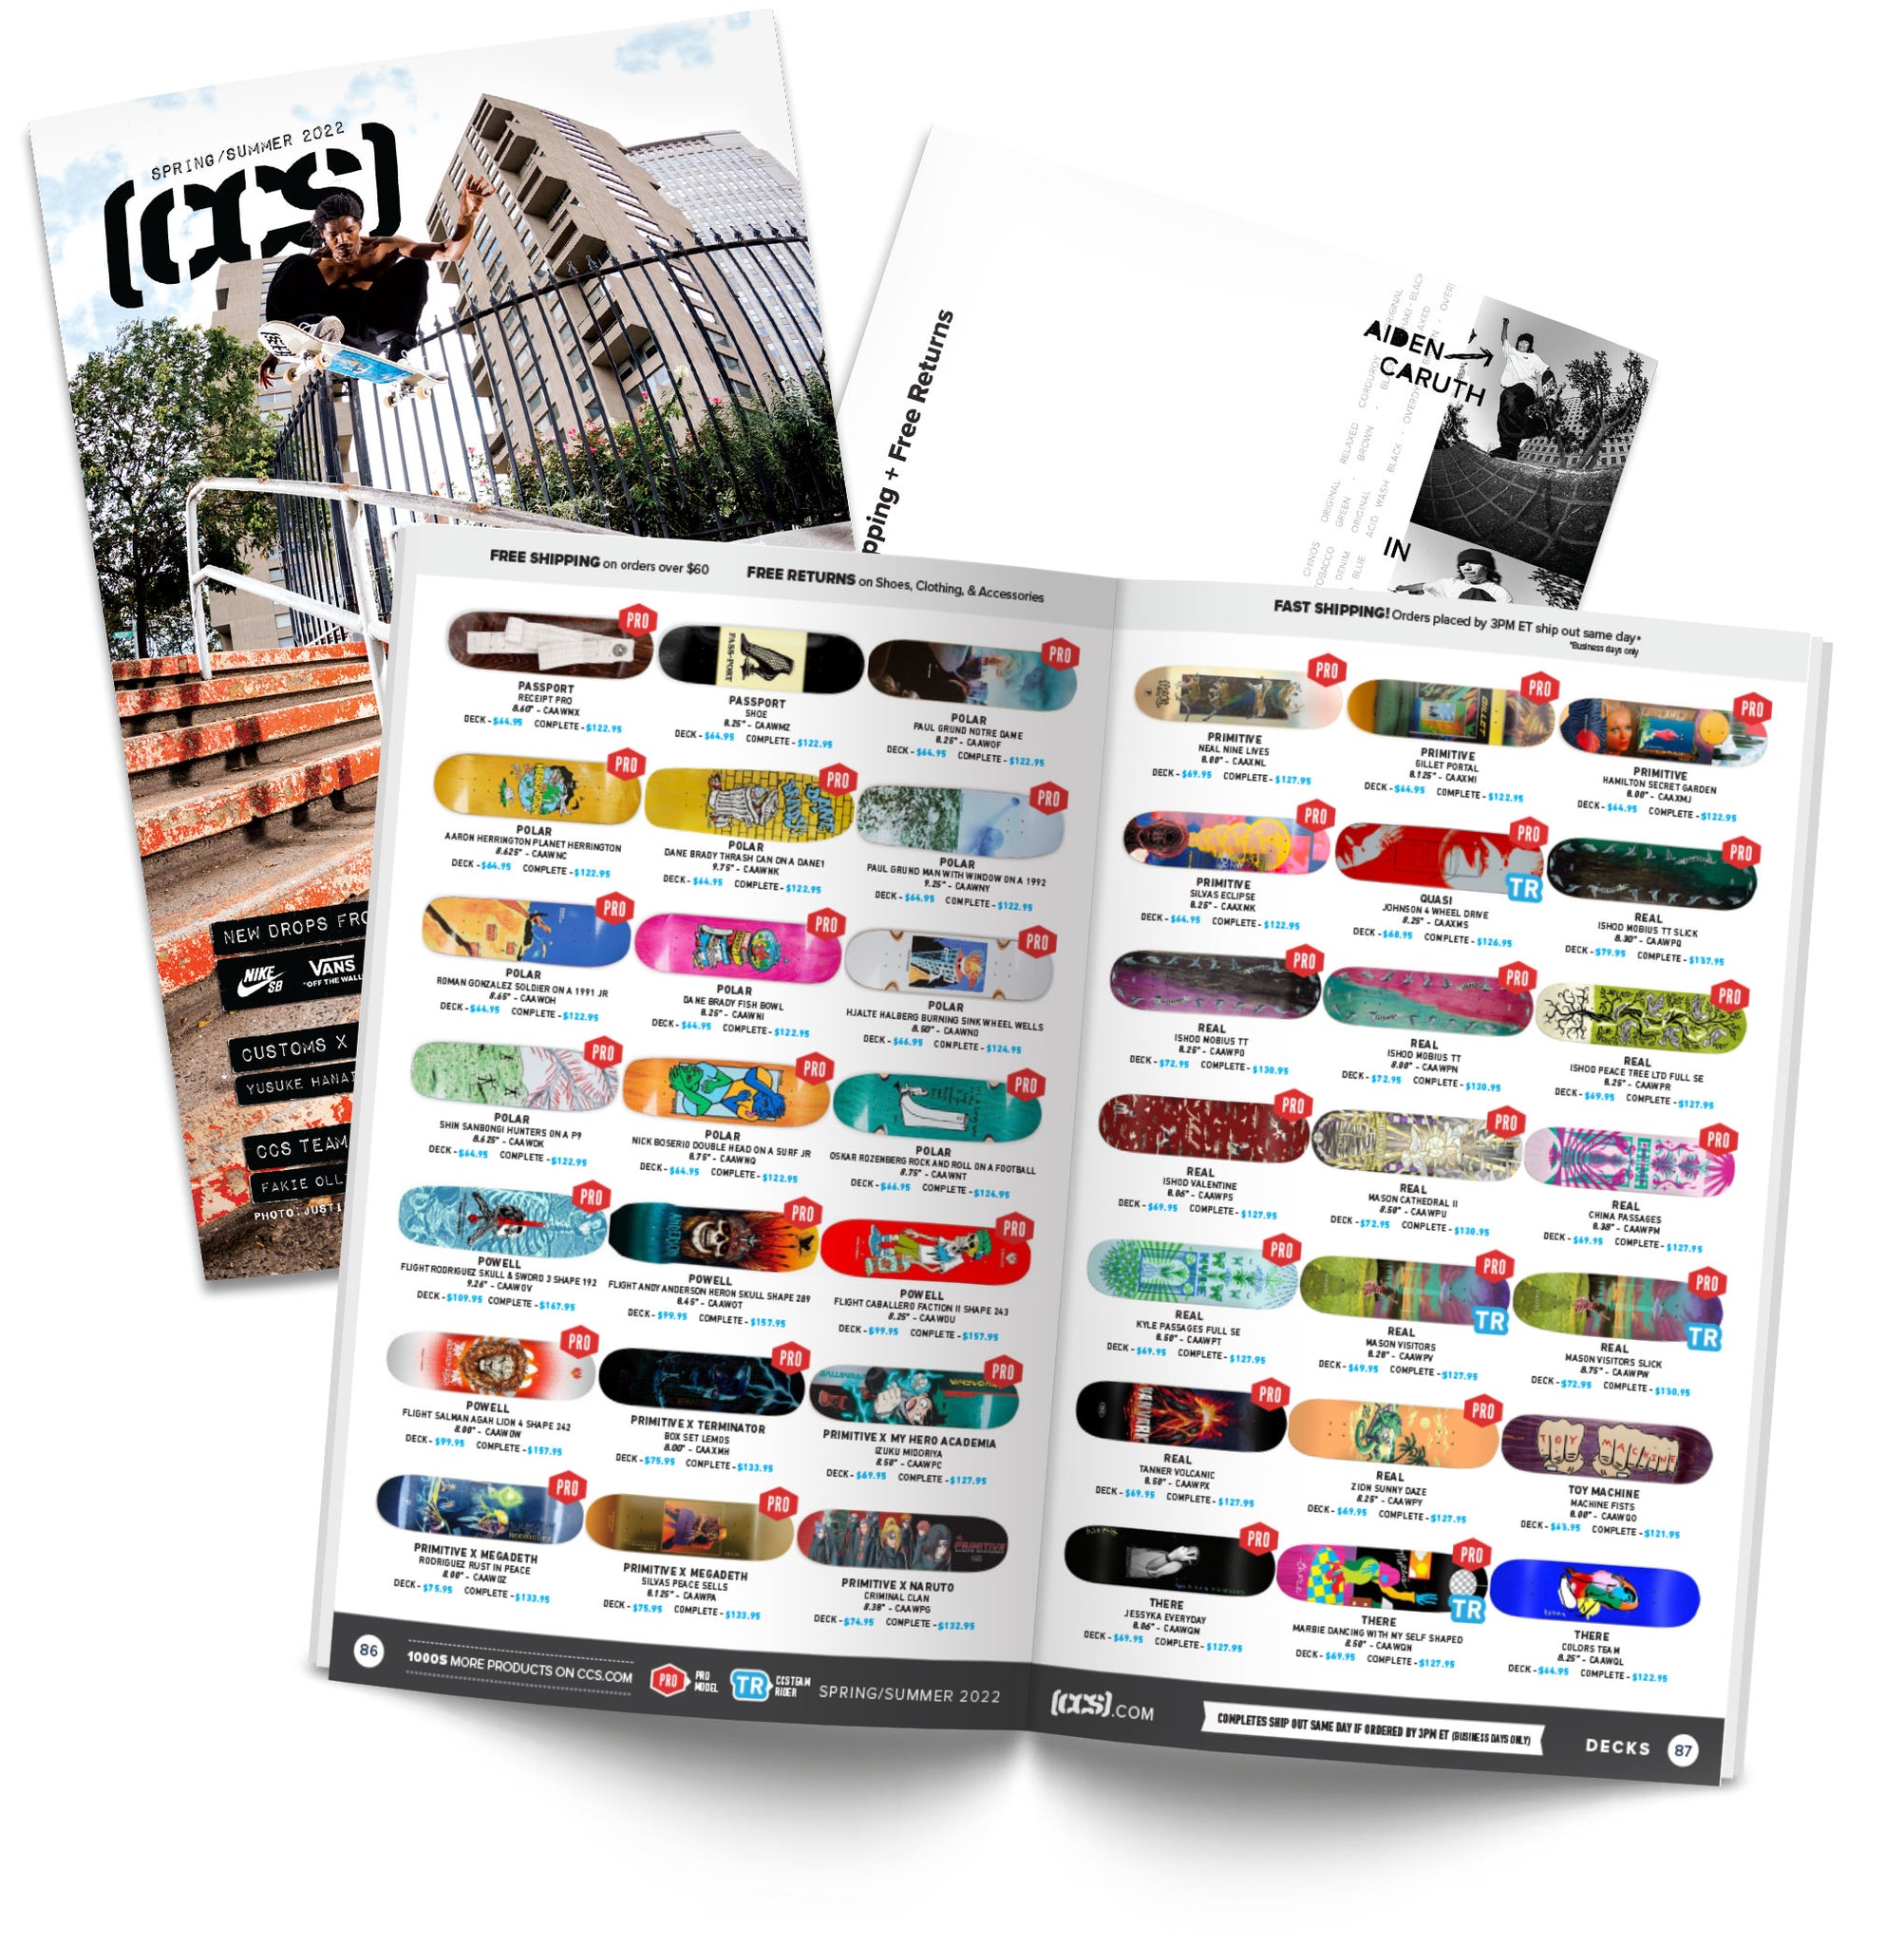 Request Our CCS Catalog - Check Out 1000s of Skate Products!